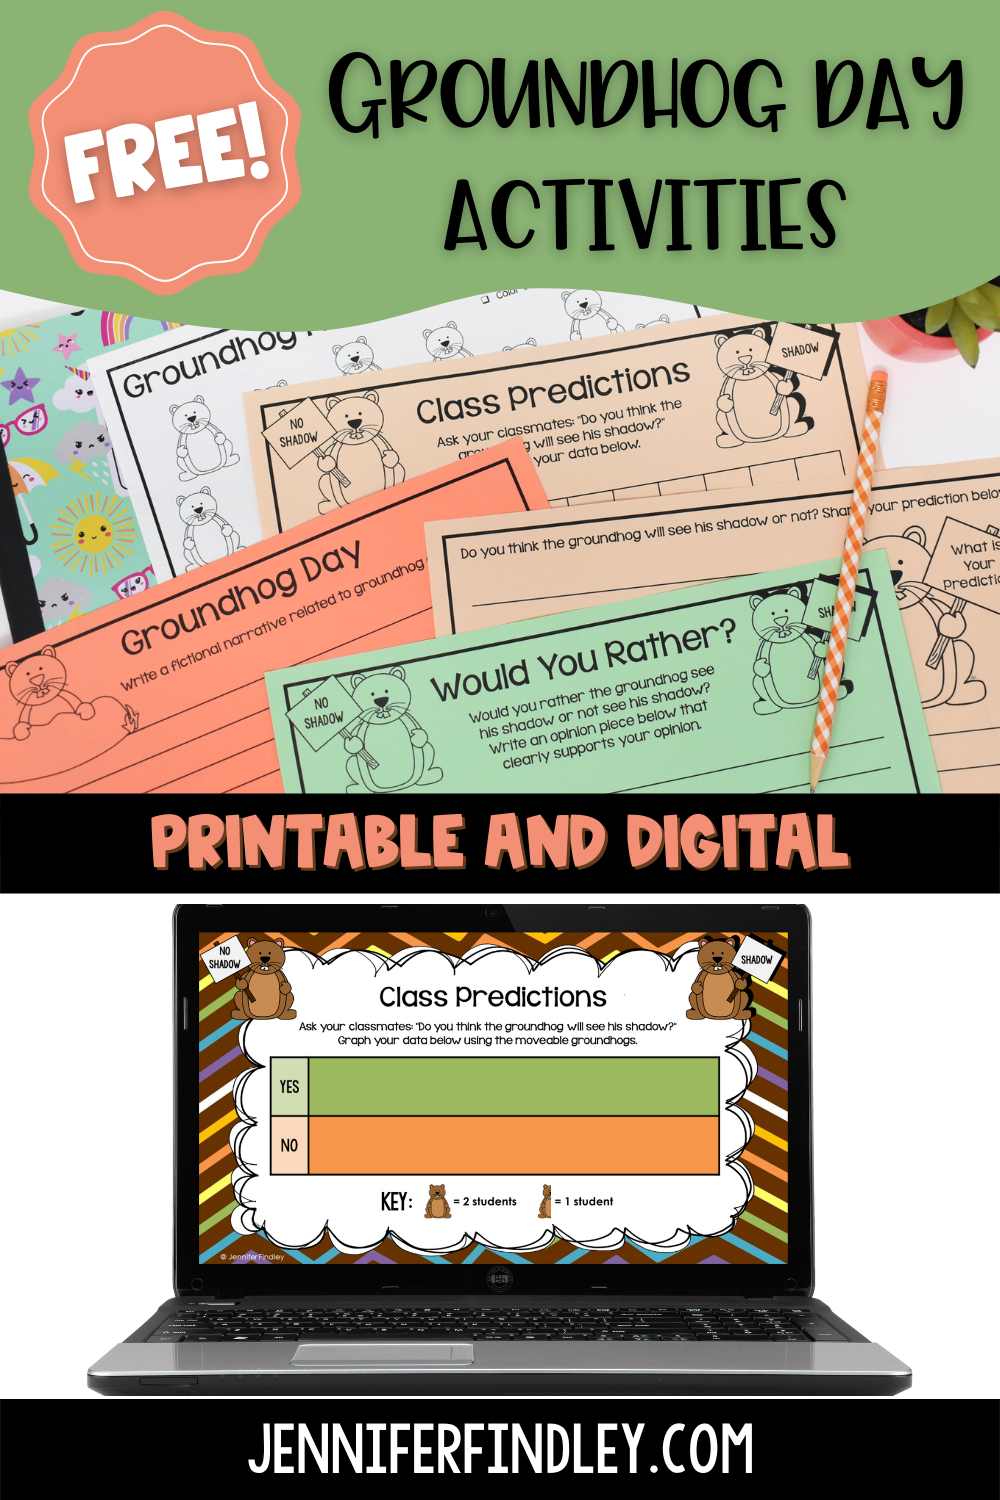 Download these free digital and printable Groundhog Day activities.